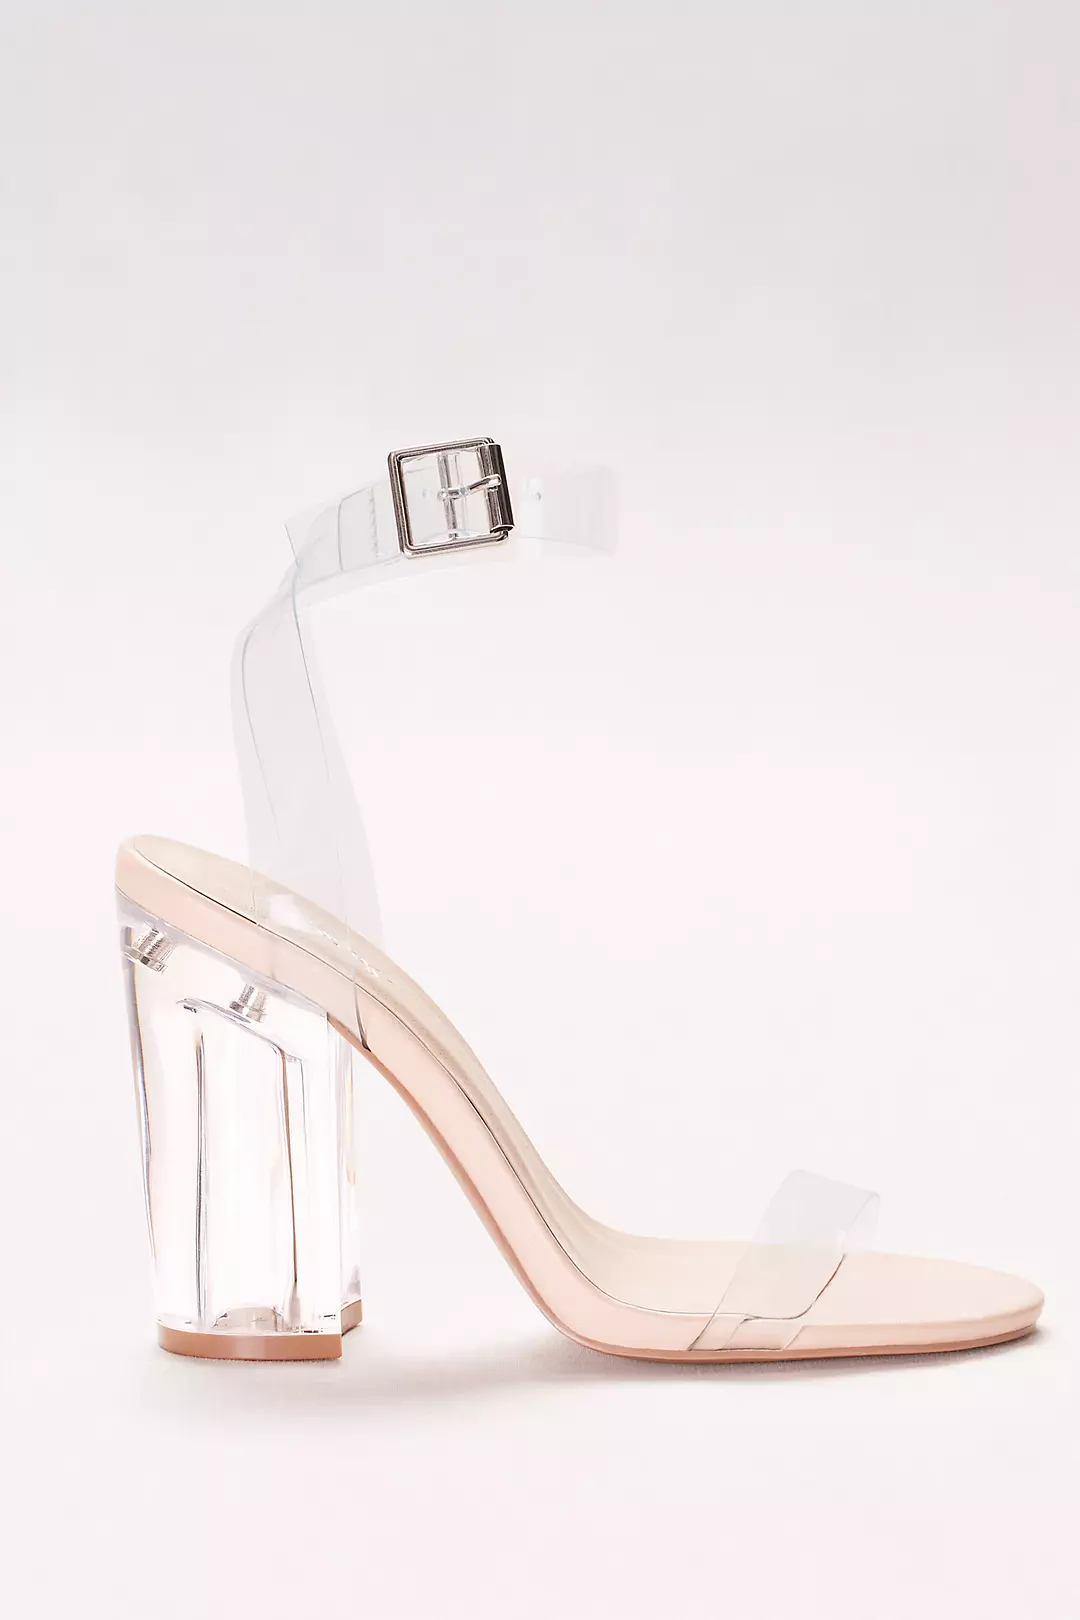 Strappy Lucite Heels Image 3